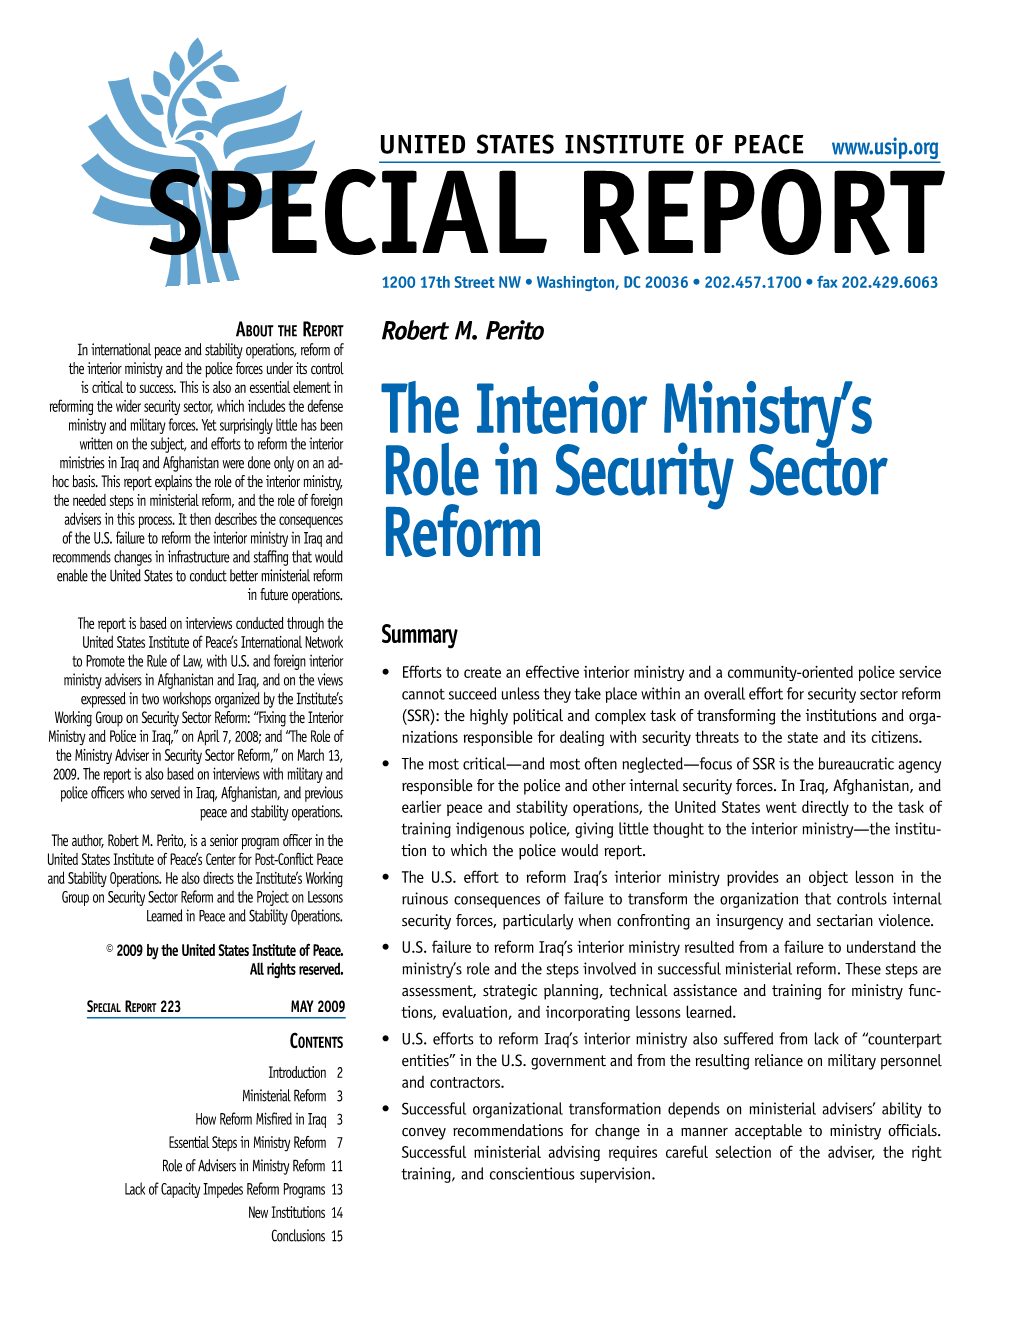 The Interior Ministry's Role in Security Sector Reform